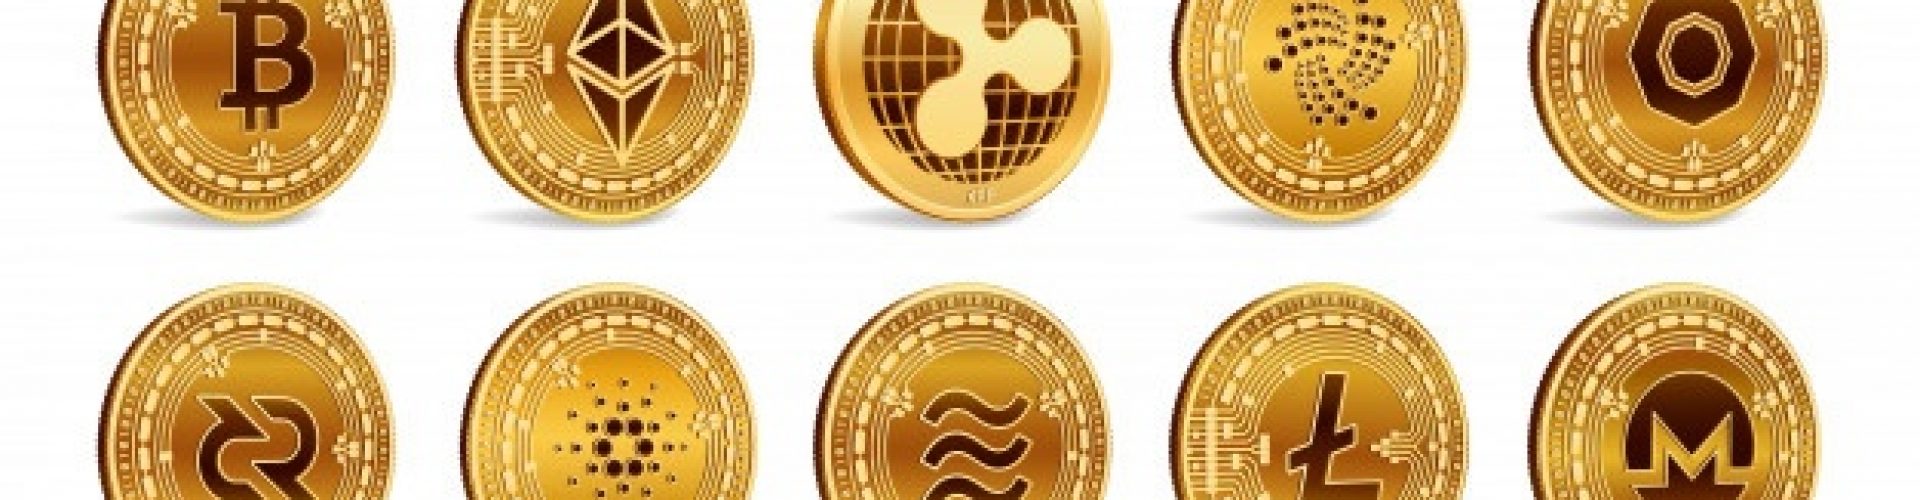 cryptocurrency-3d-golden-coins-set-bitcoin-ripple-ethereum-litecoin-monero-other_127544-1096